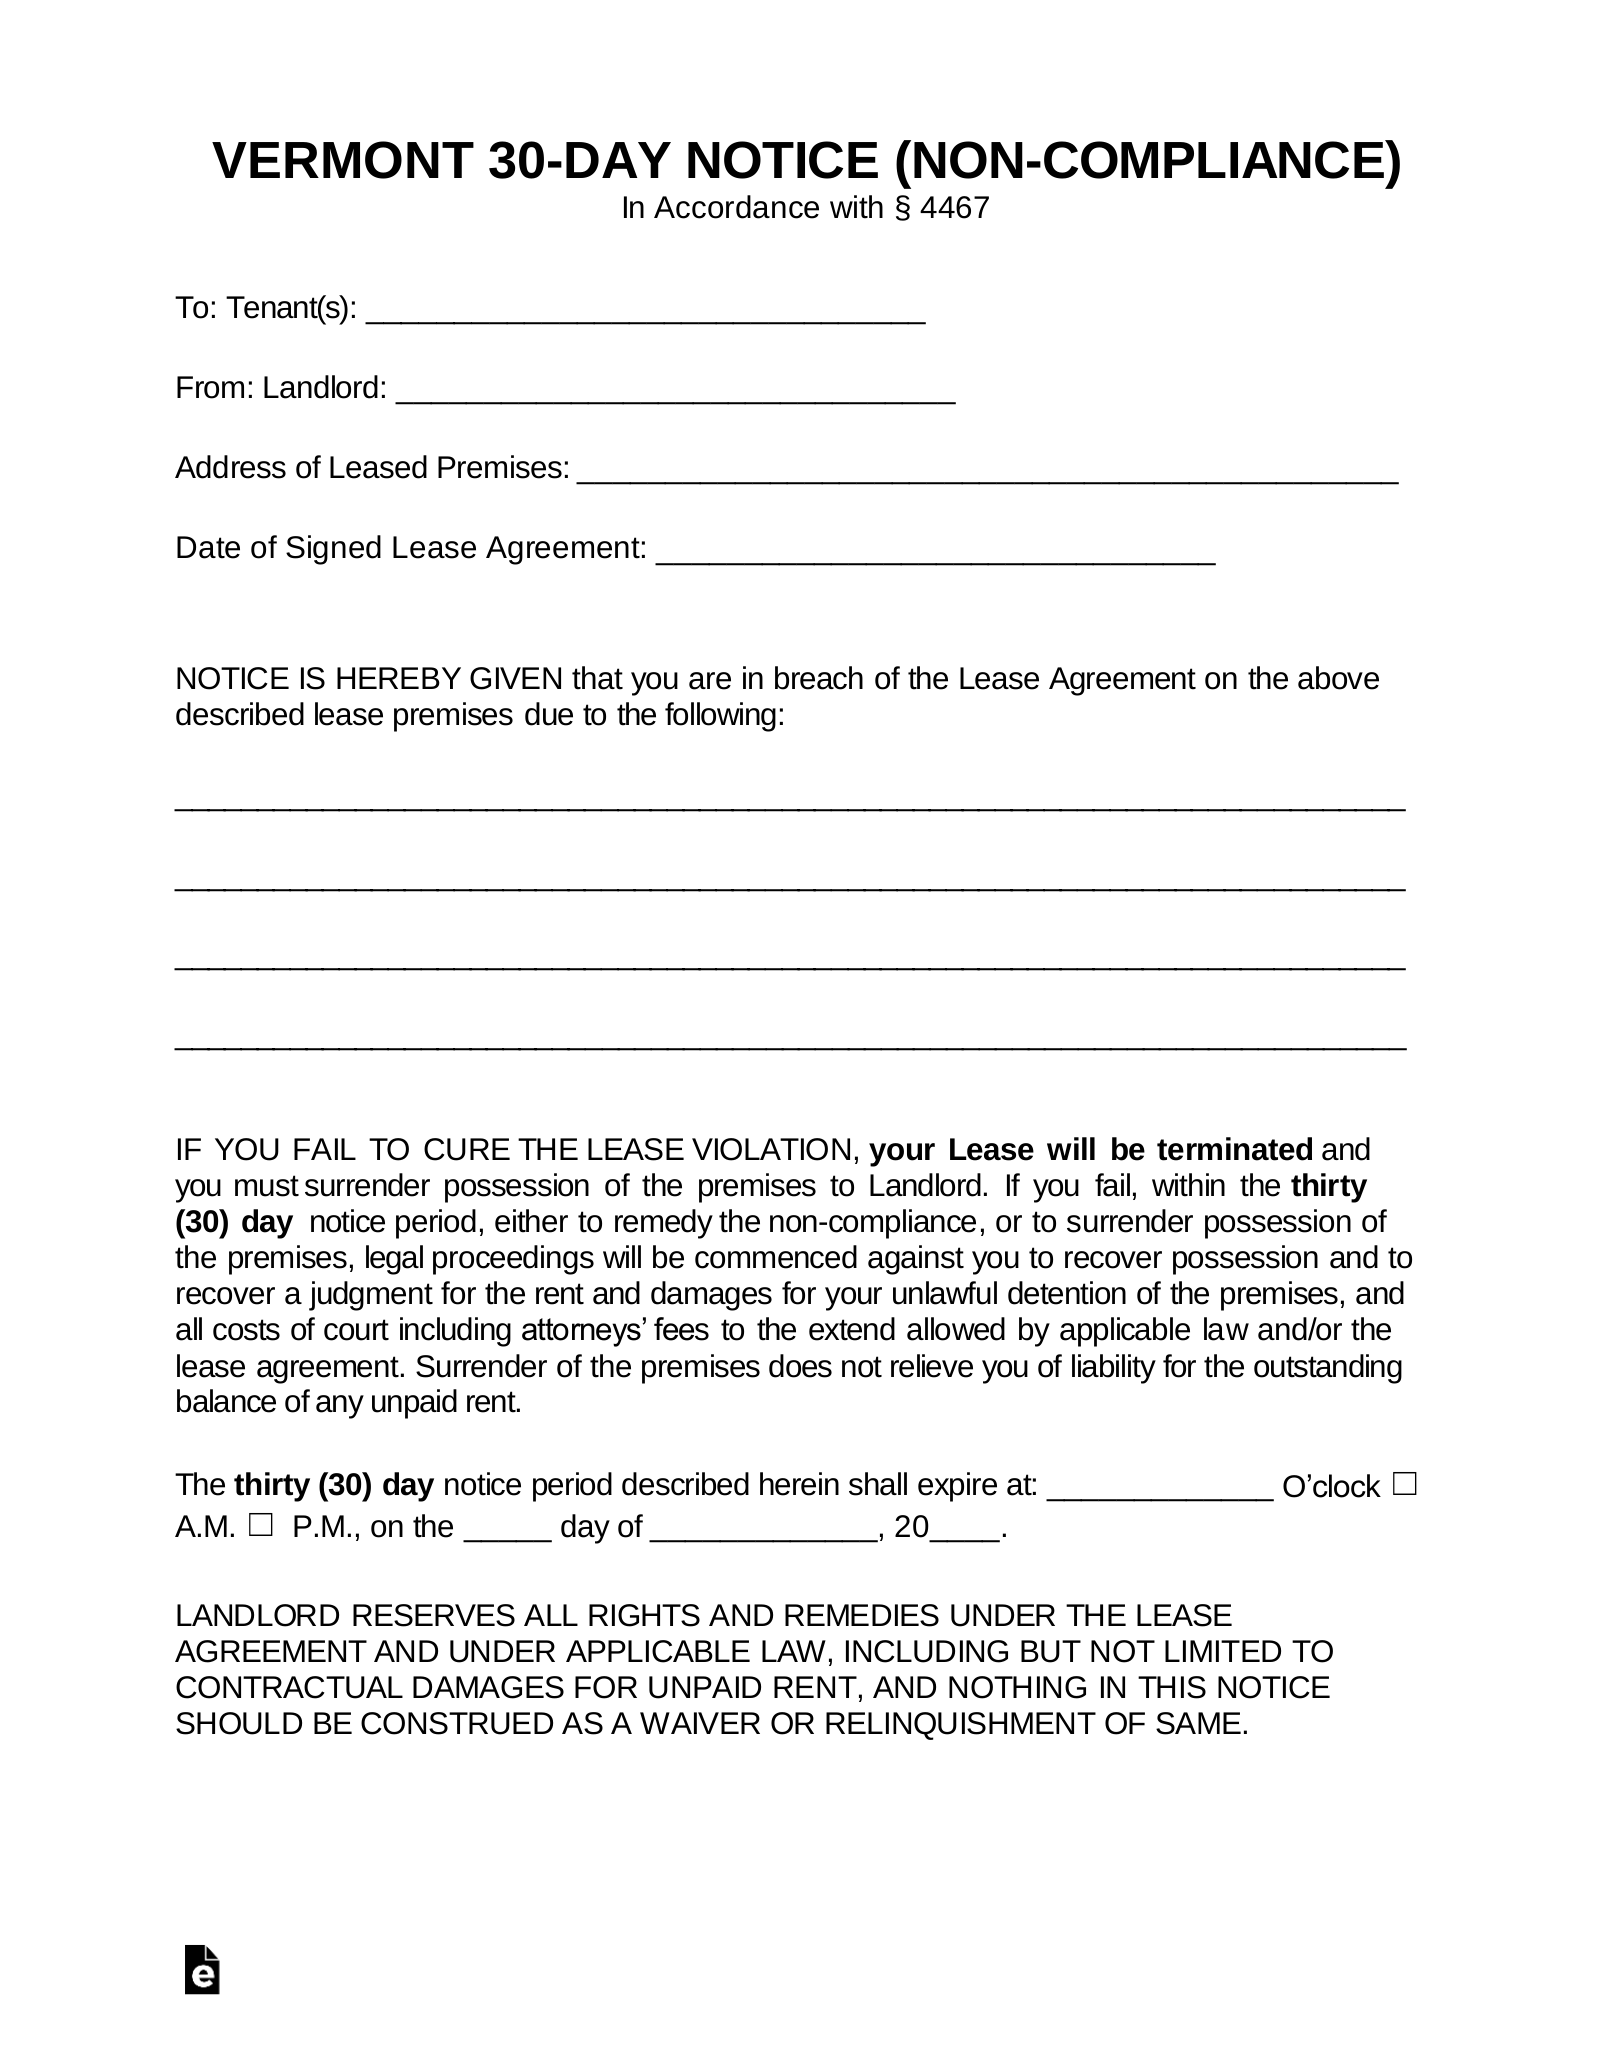 Vermont 30-Day Notice to Quit Form | Non-Compliance